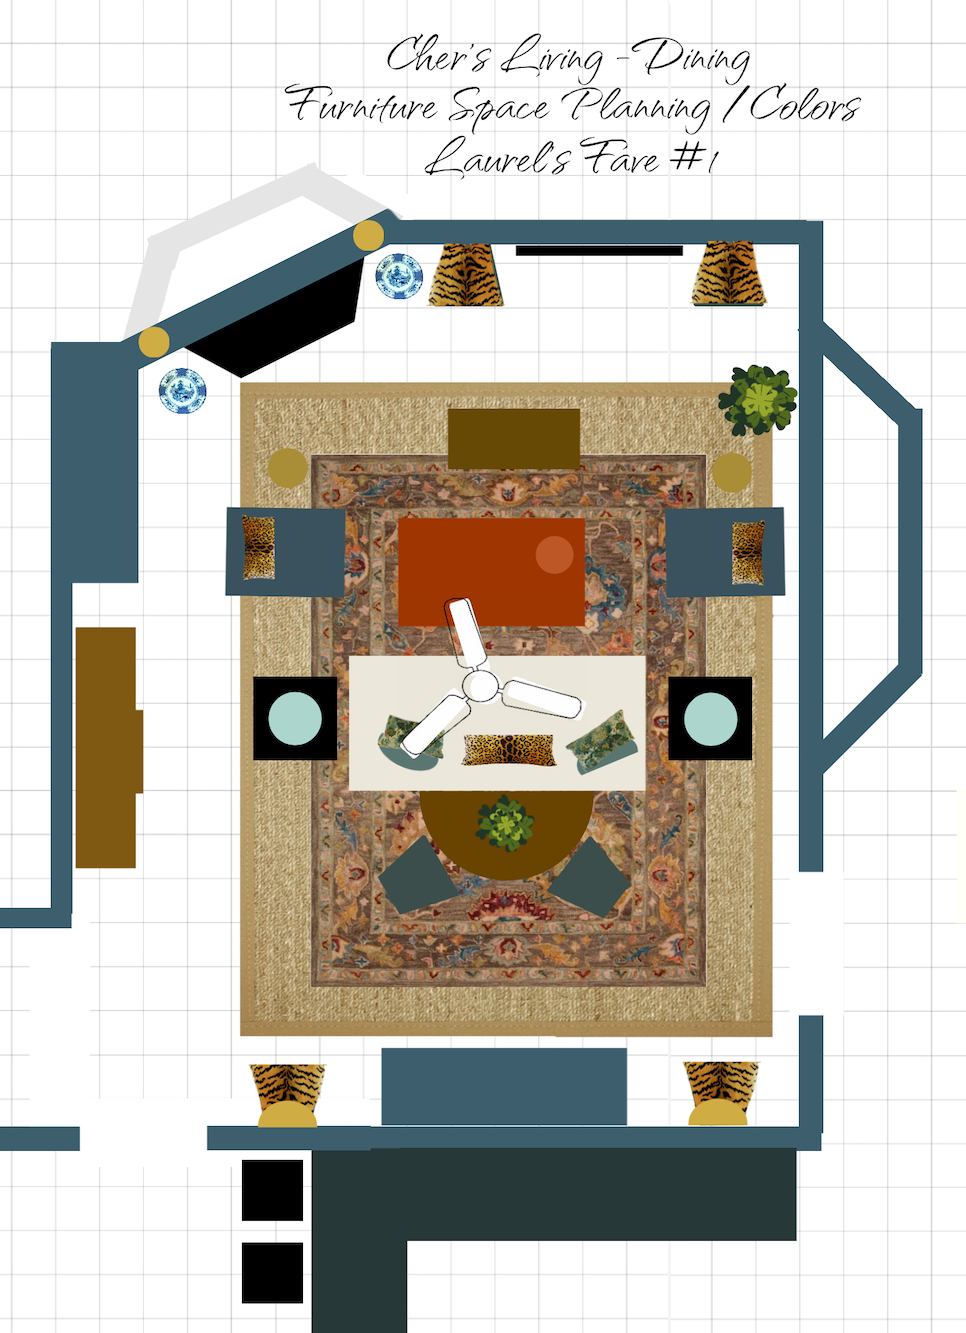 Cher's living dining room layout - space planning_colors - light sofa seagrass rug